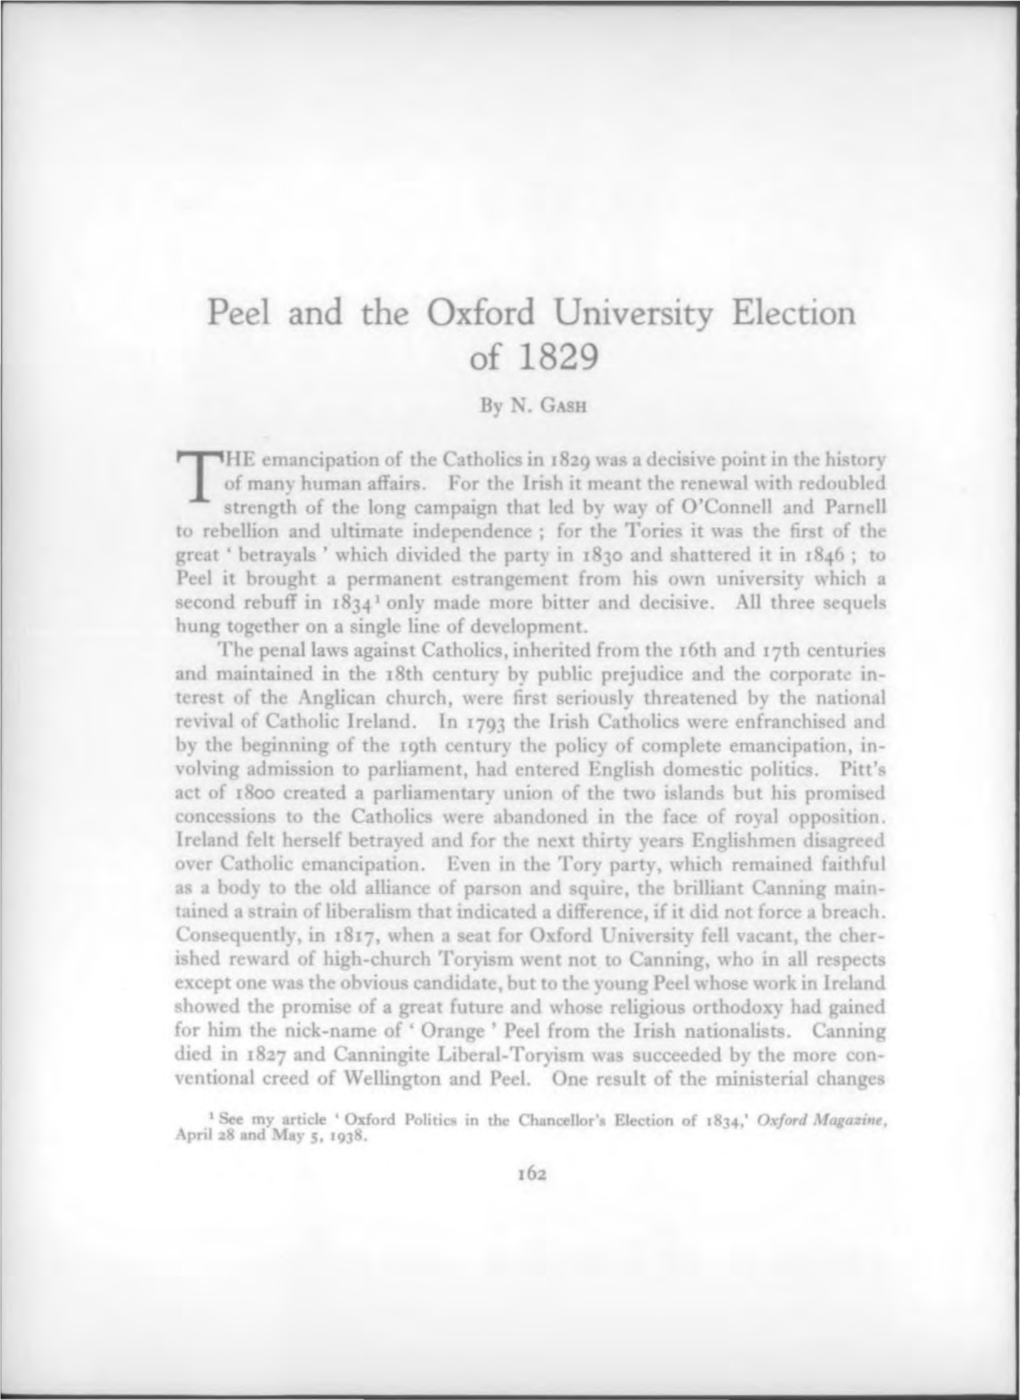 Peel and the Oxford University Election of 1829 by N